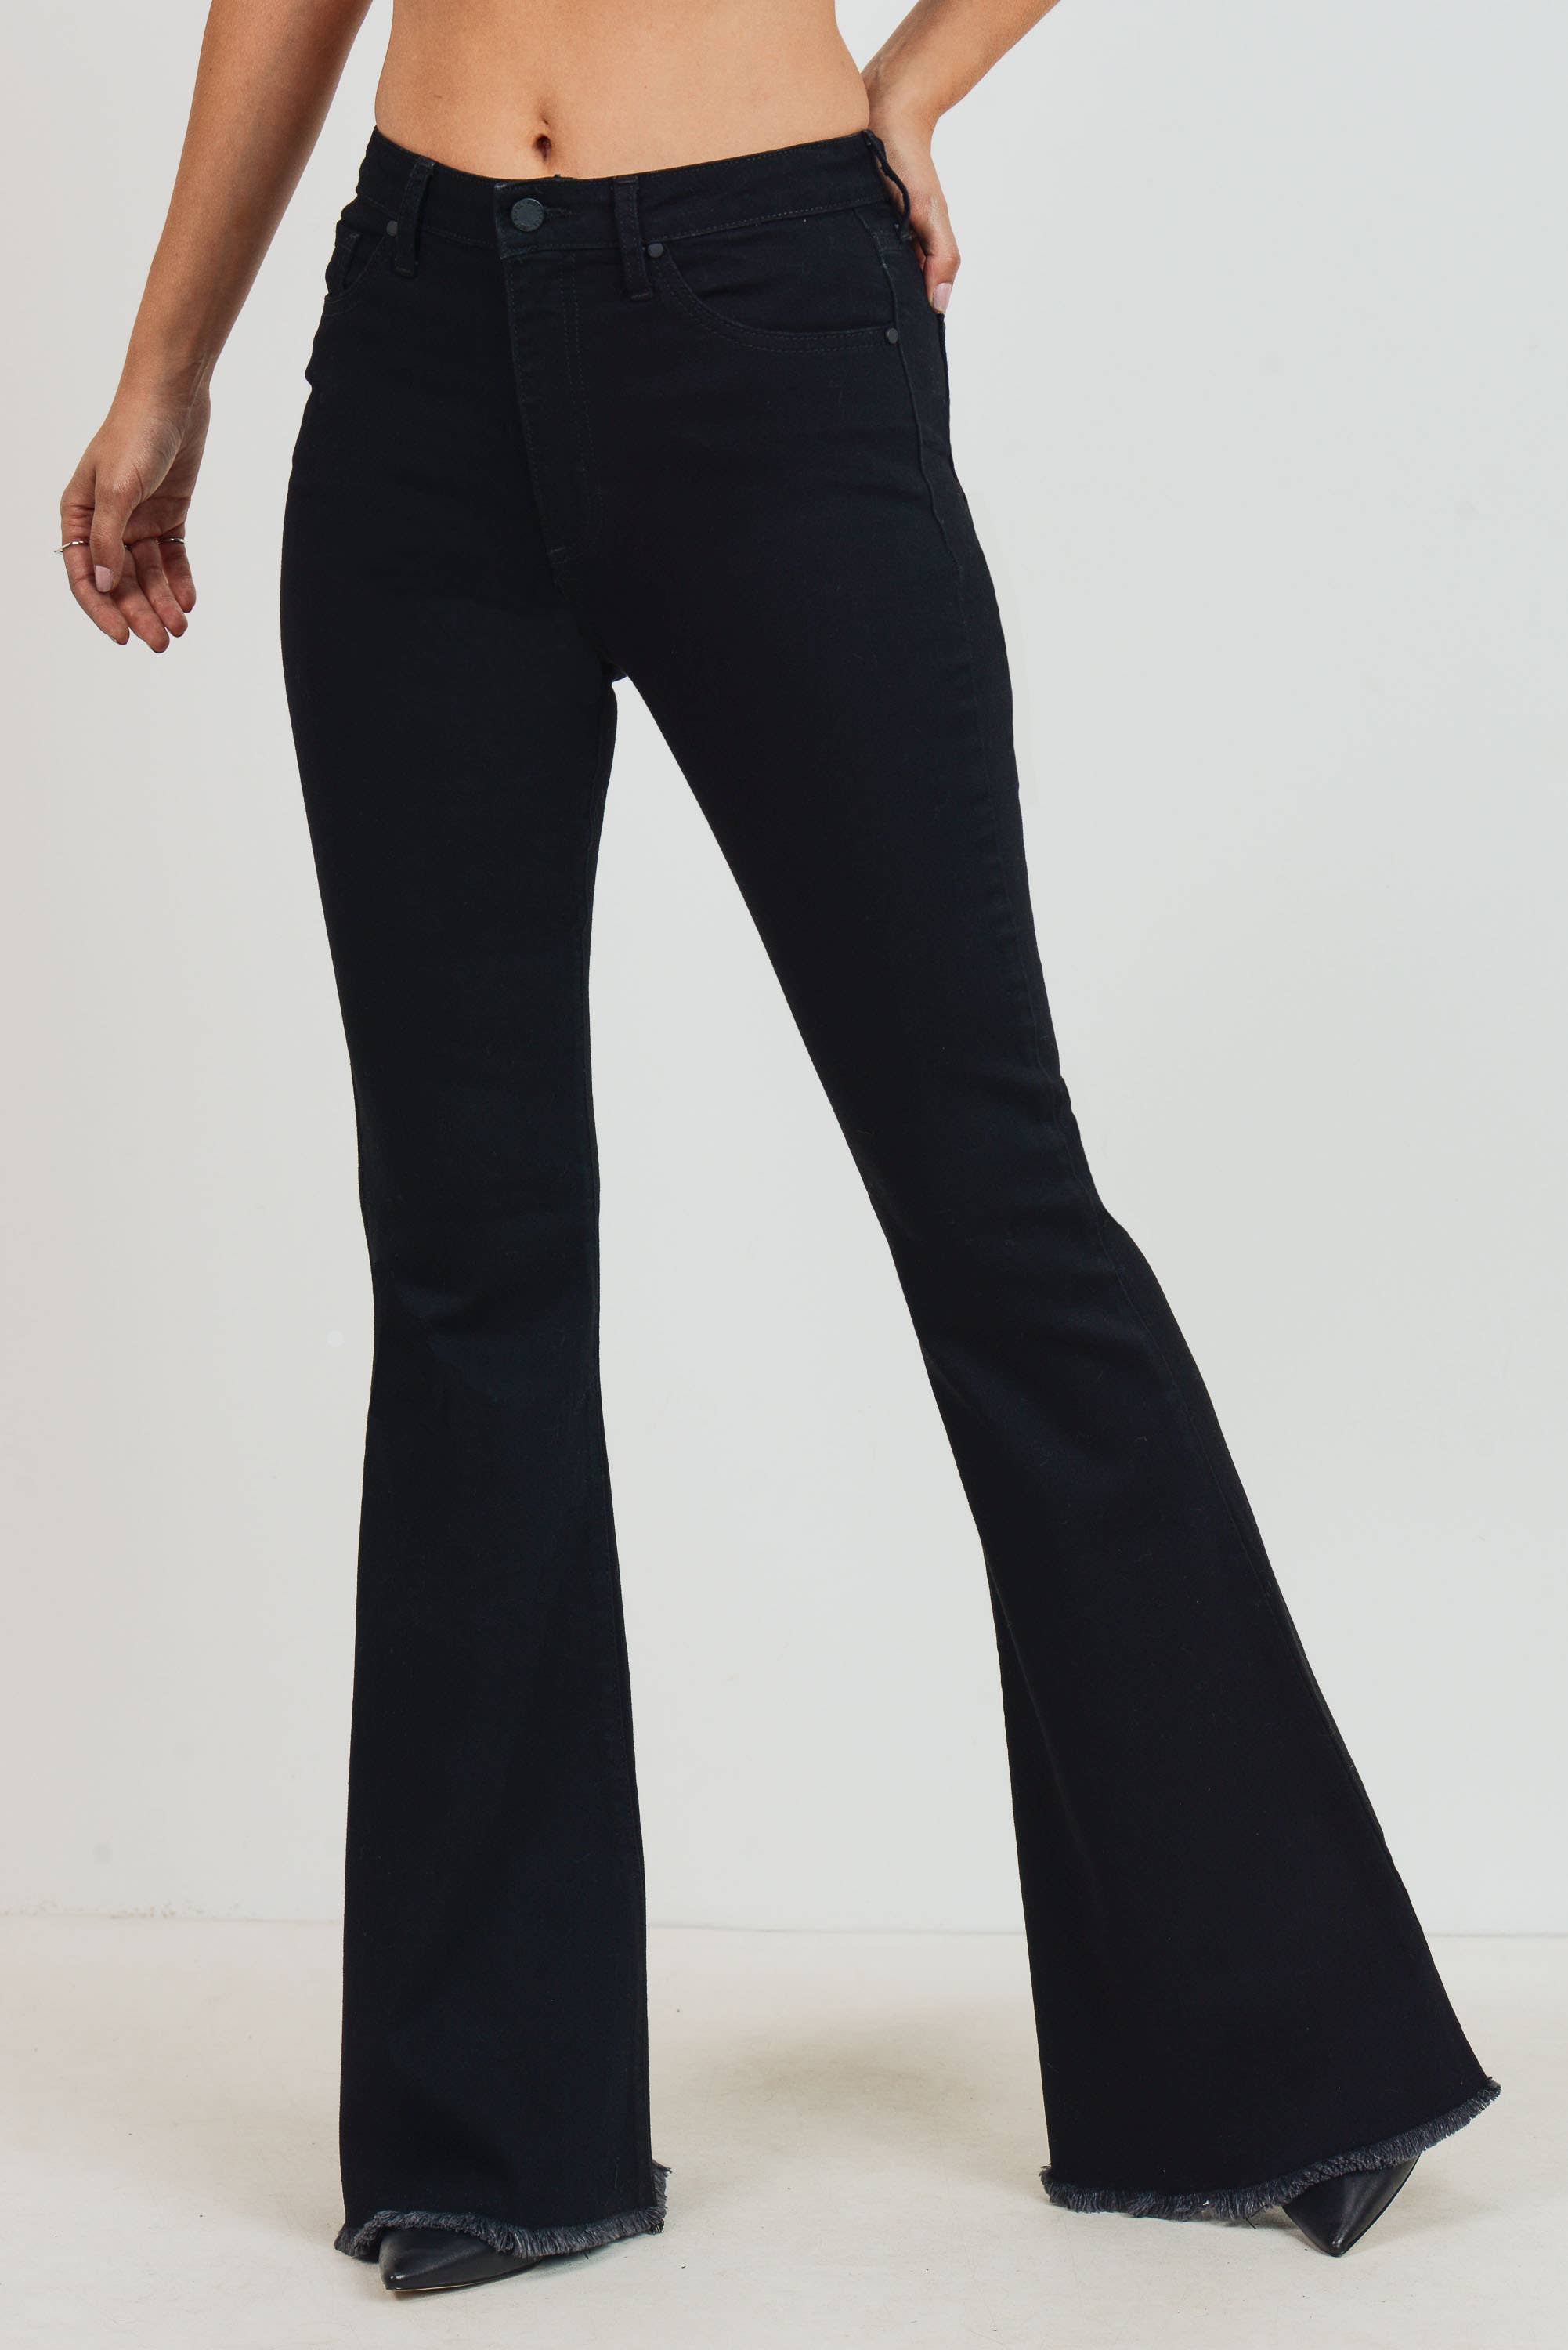 Chels High Waisted Bell Bottom Flare Denim Jeans - Black – Willow Boutique